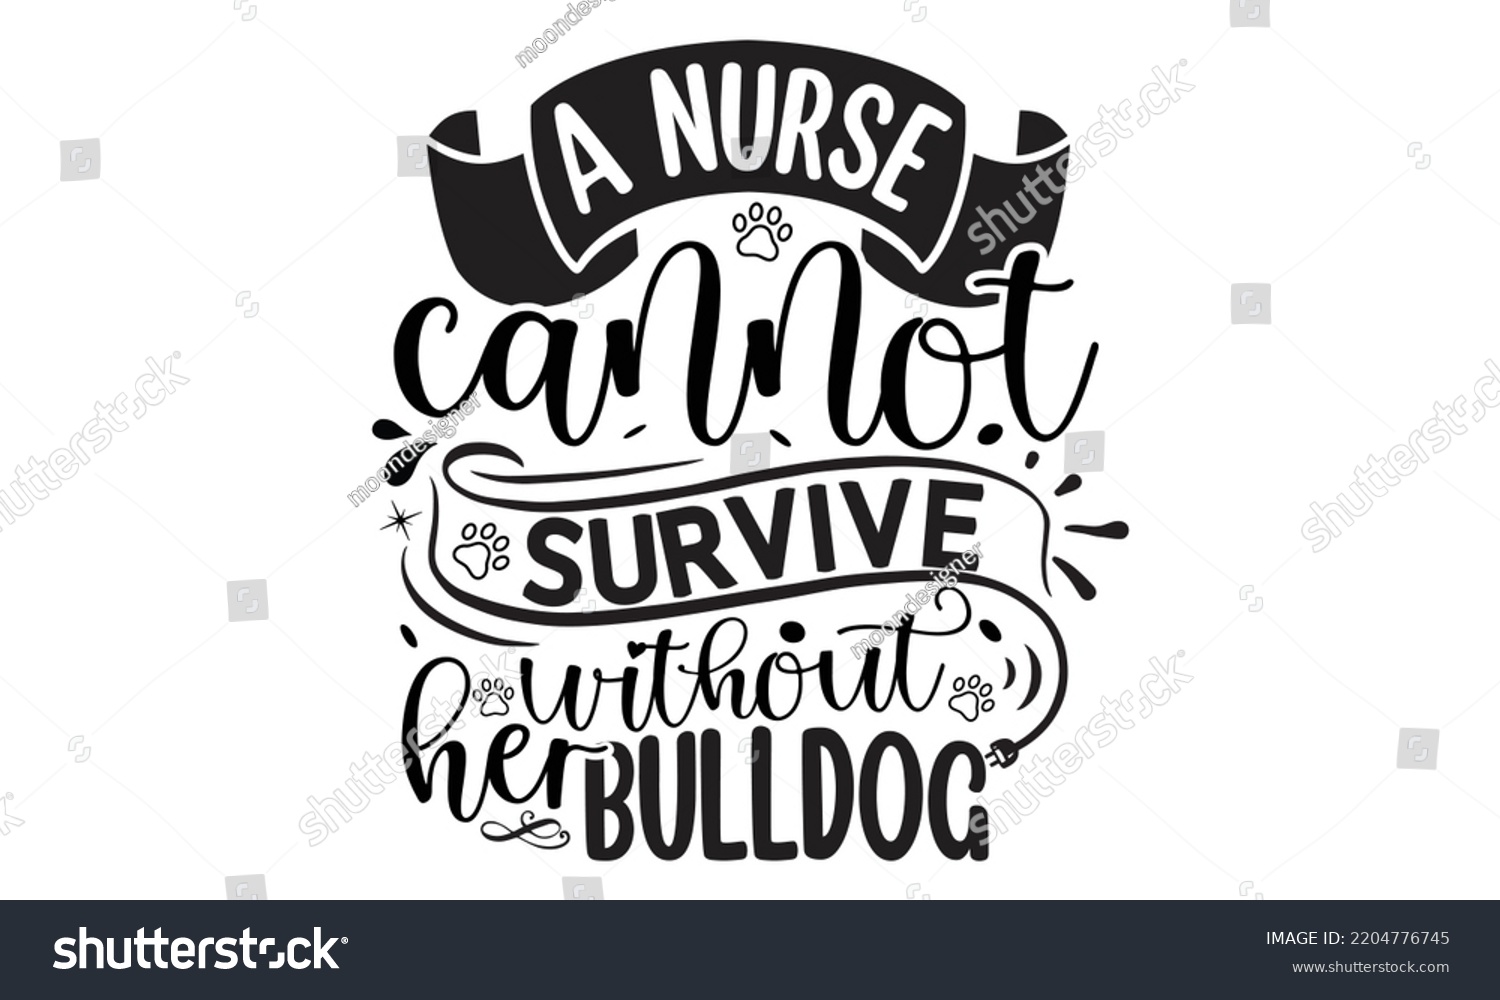 SVG of A nurse cannot survive without her bulldog- Bullodog T-shirt and SVG Design,  Dog lover t shirt design gift for women, typography design, can you download this Design, svg Files for Cutting and Silhou svg